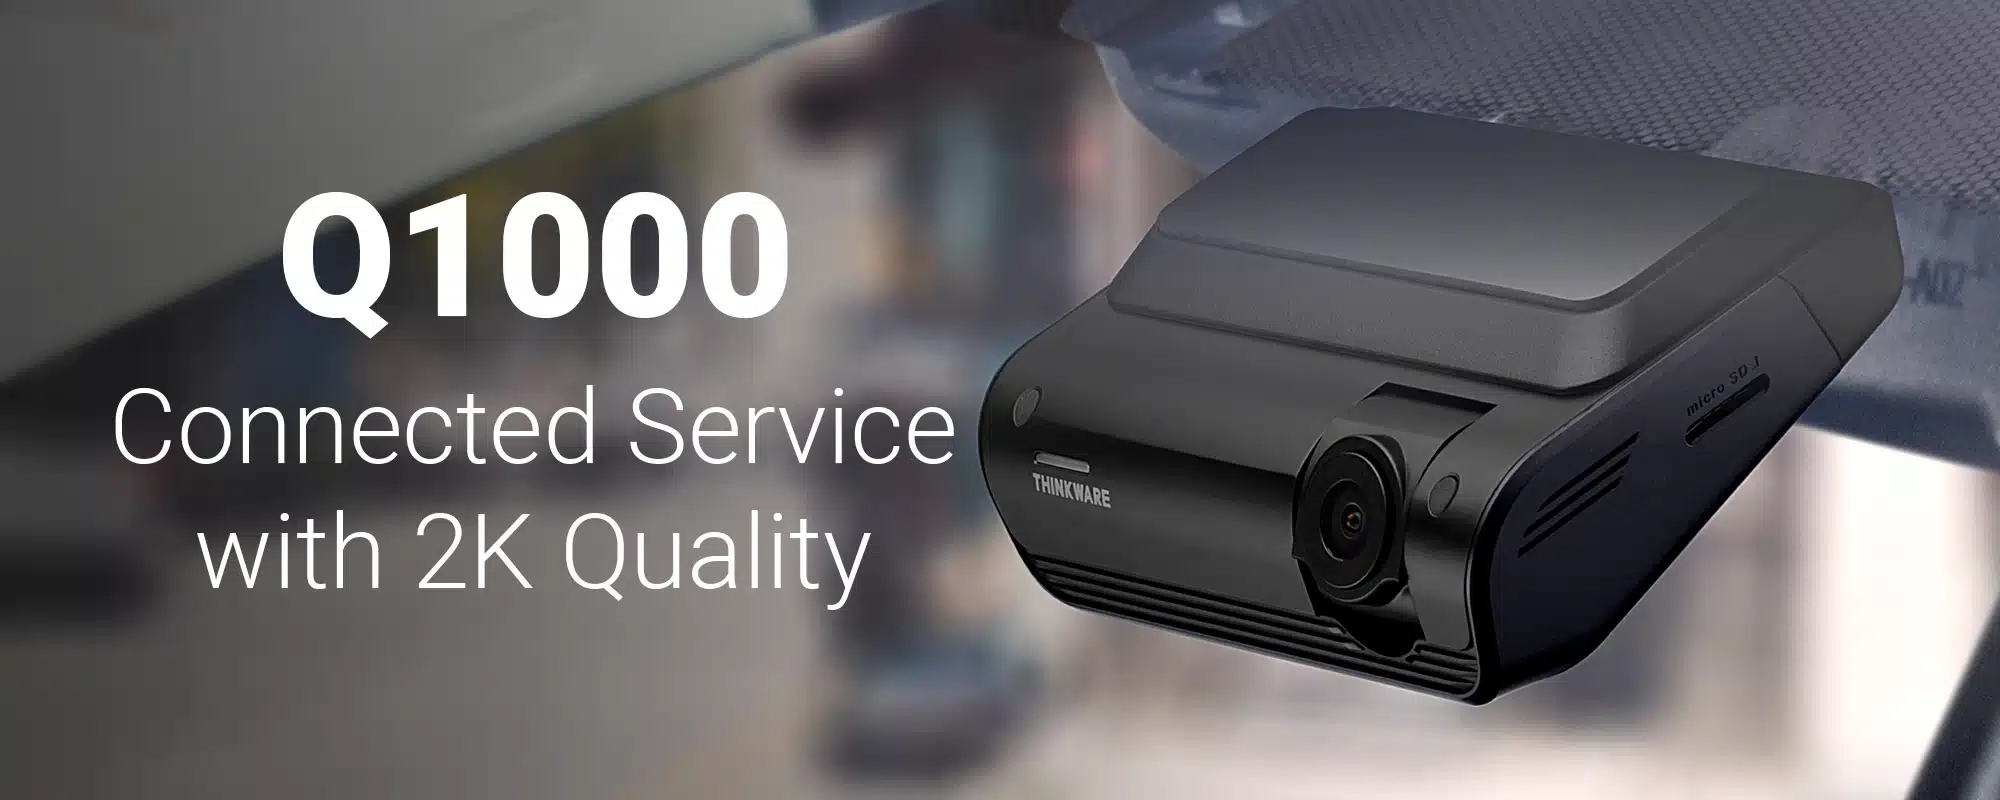 Thinkware Dash Cam Q1000 Connected Service with 2K Quality